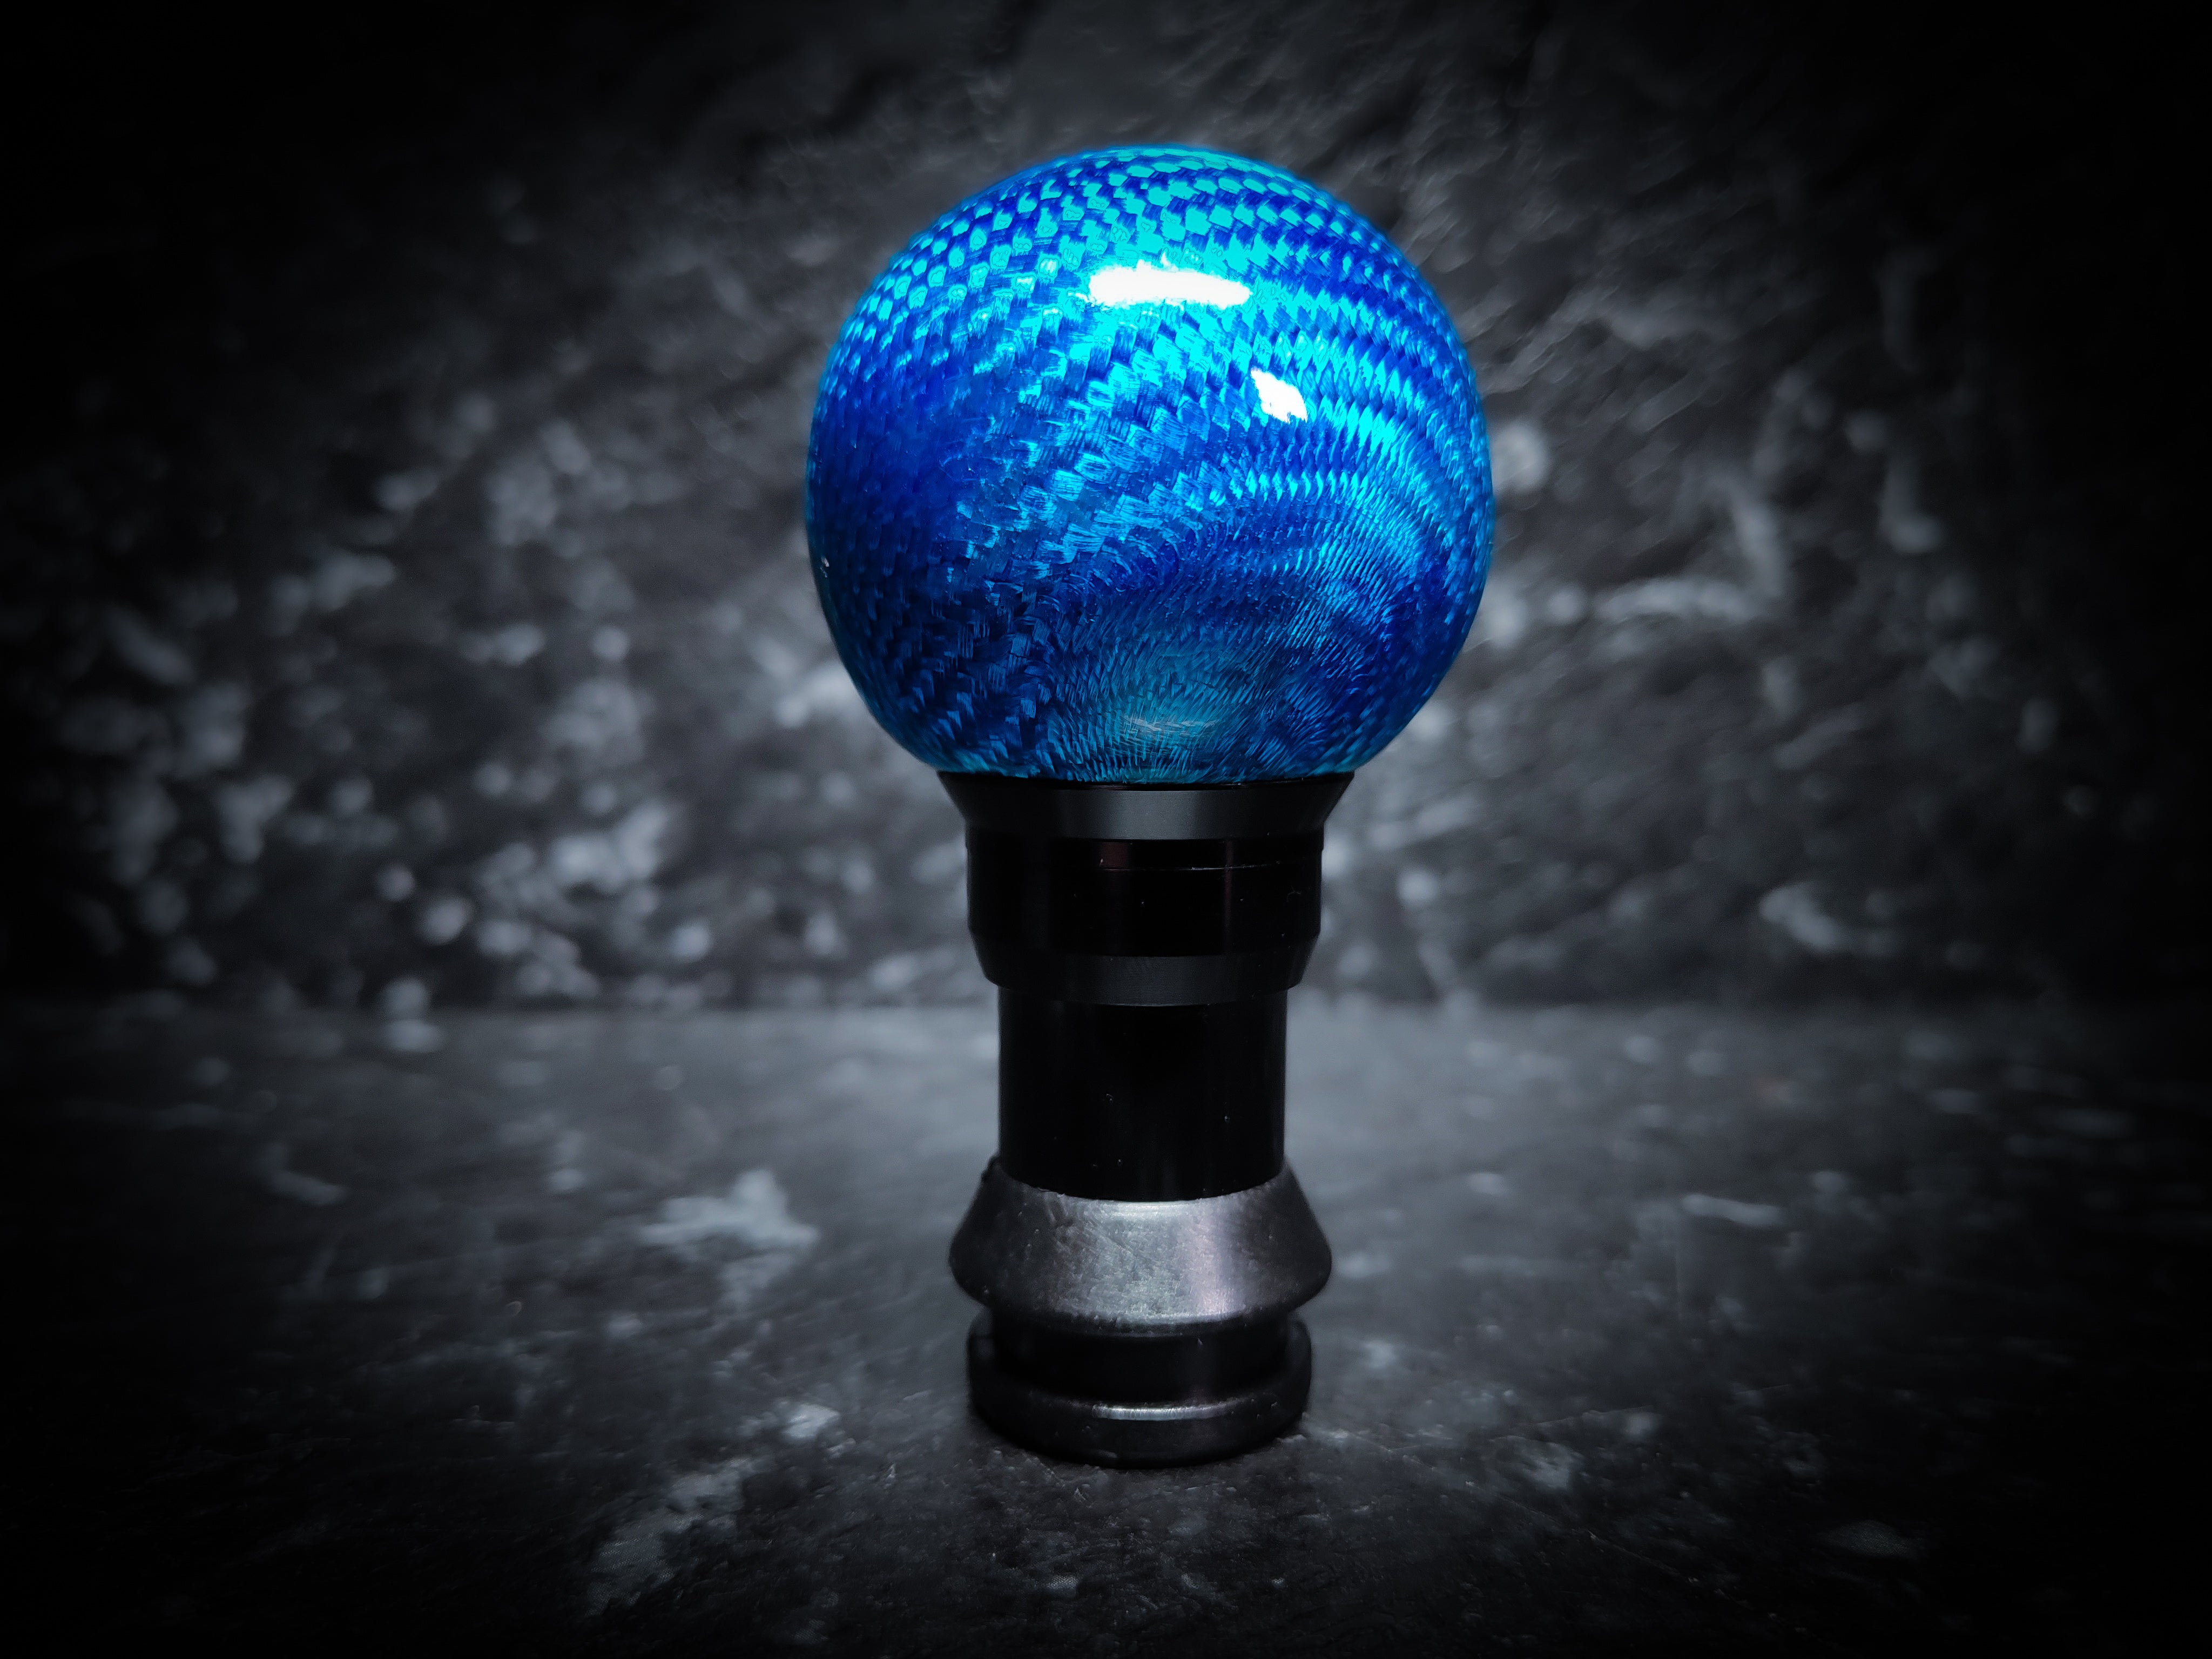 Limited Edition Carbon Blue Pop Down Auto Gear Shifter